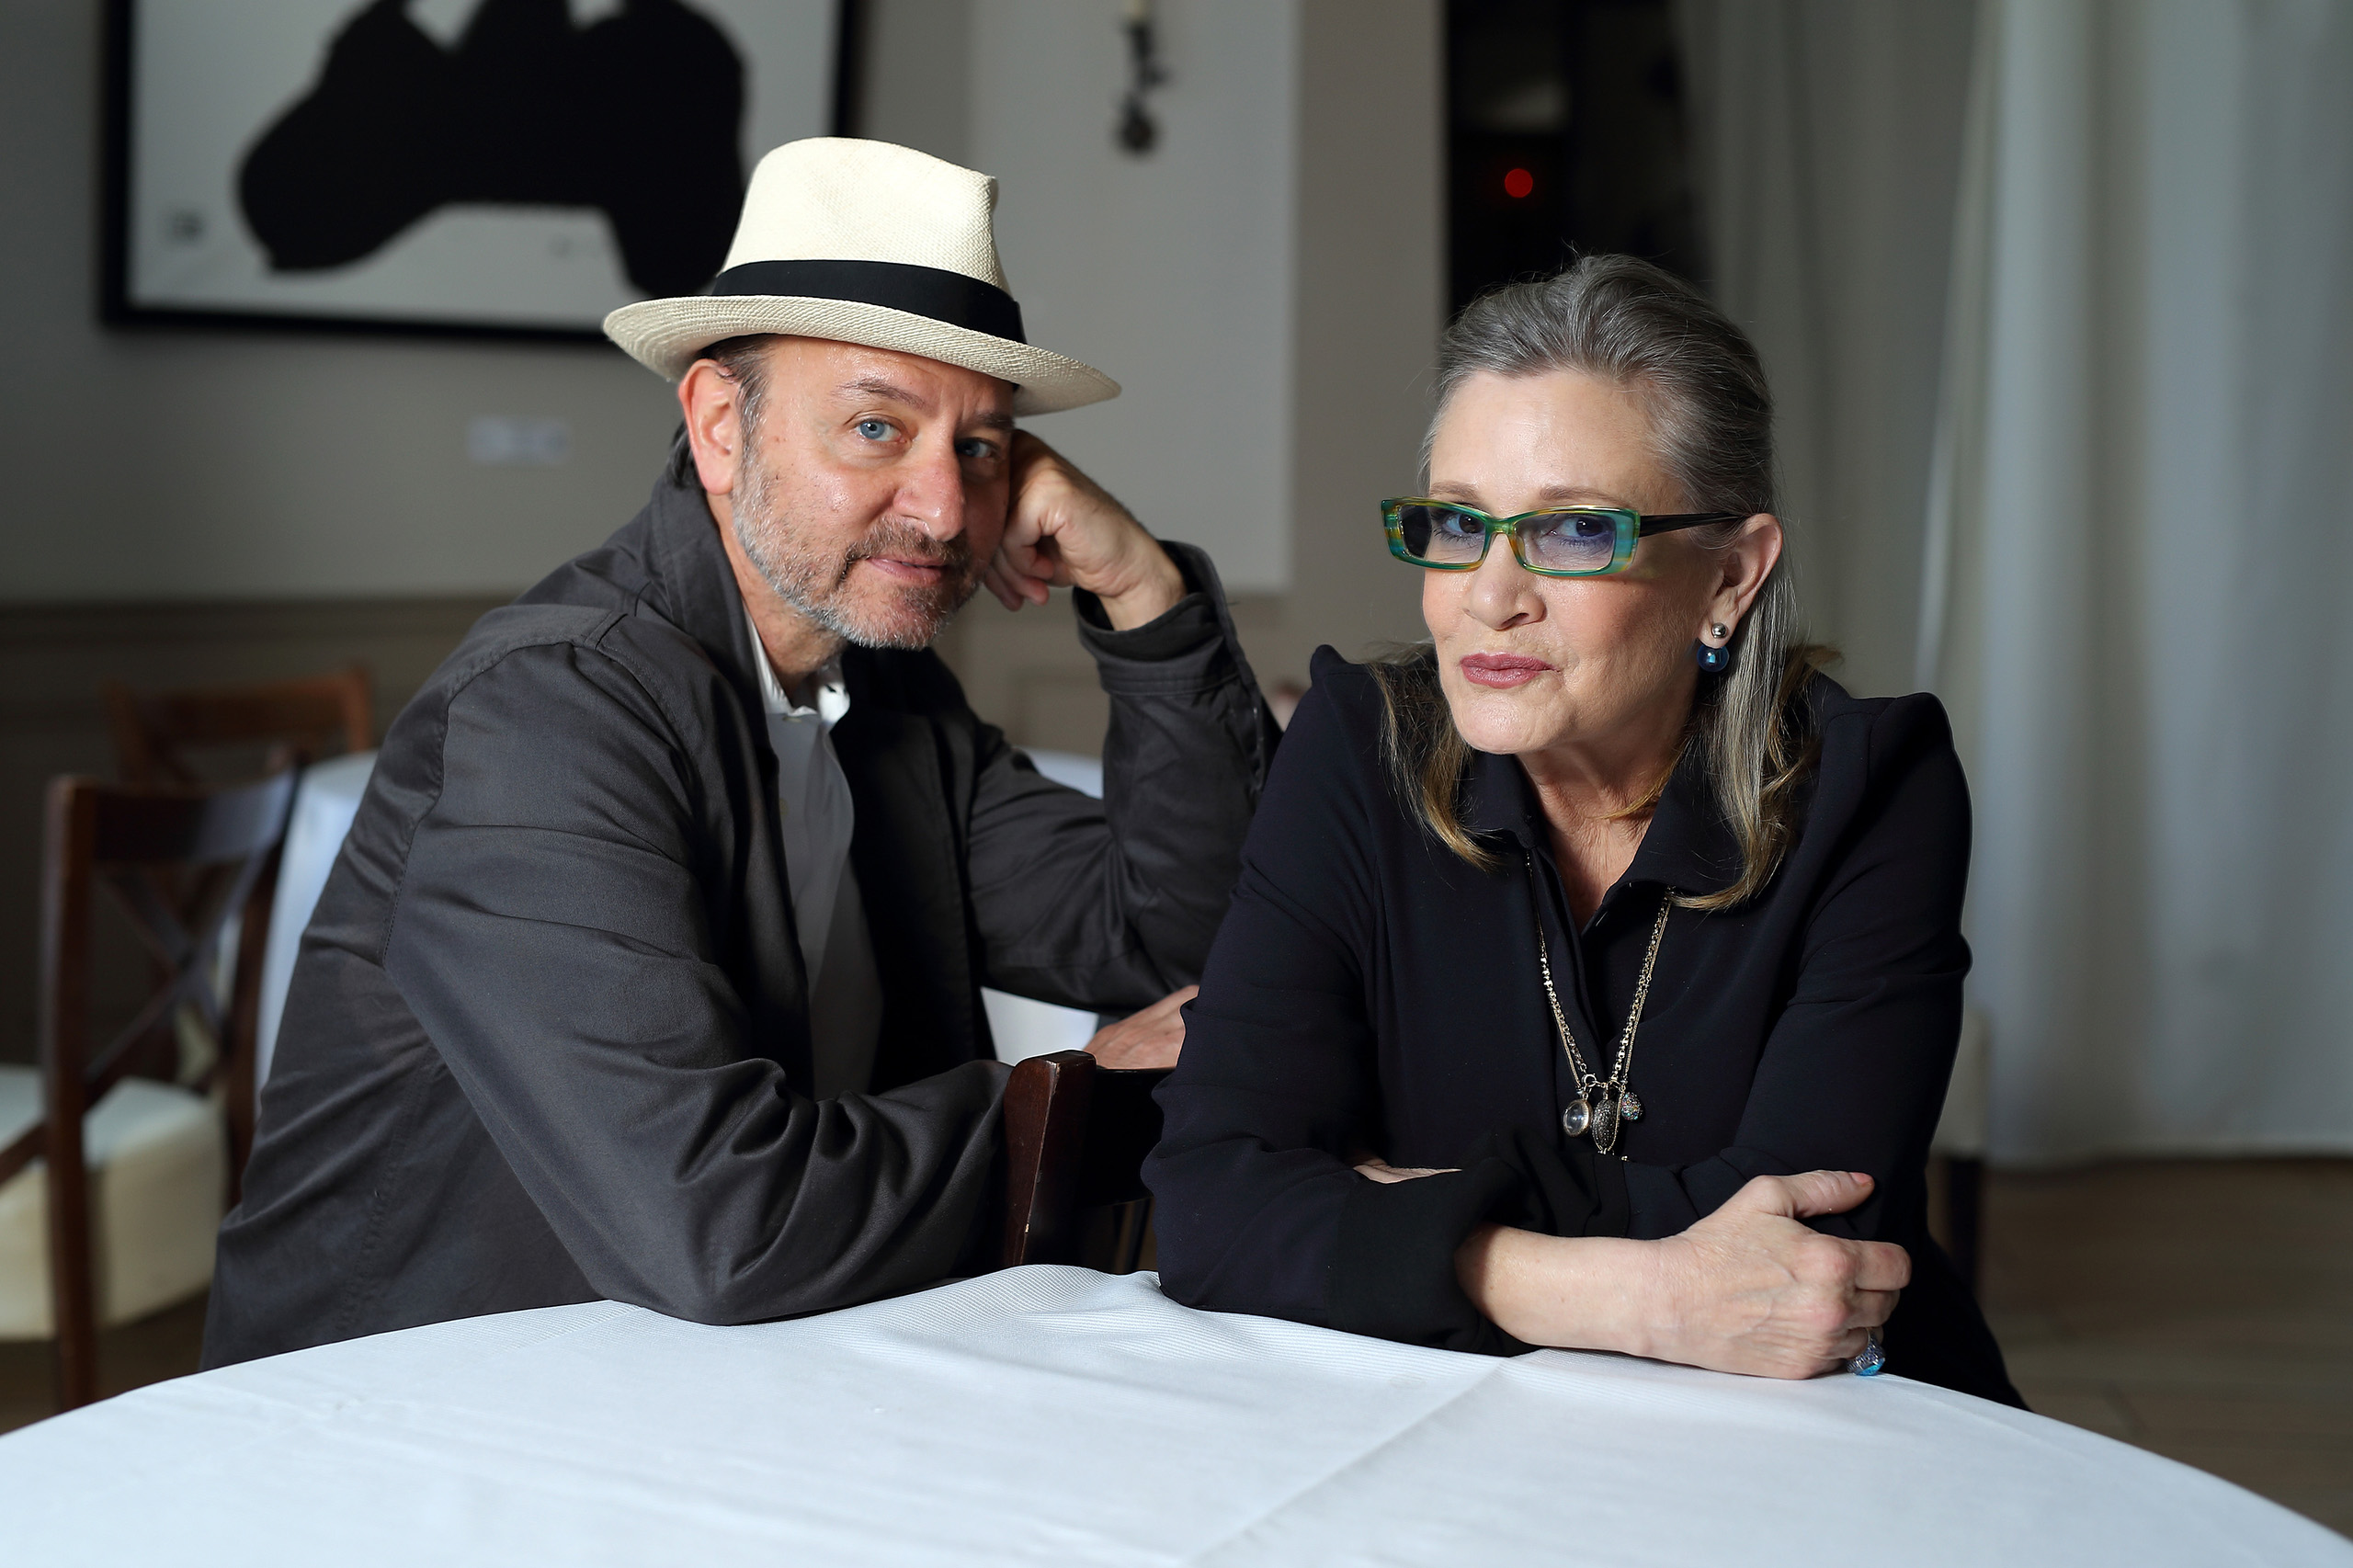 Carrie Fisher and Fisher Stevens attend a photocall for "Bright Lights" during The 69th Annual Cannes Film Festival in France on May 15, 2016. (Andreas Rentz—Getty Images)